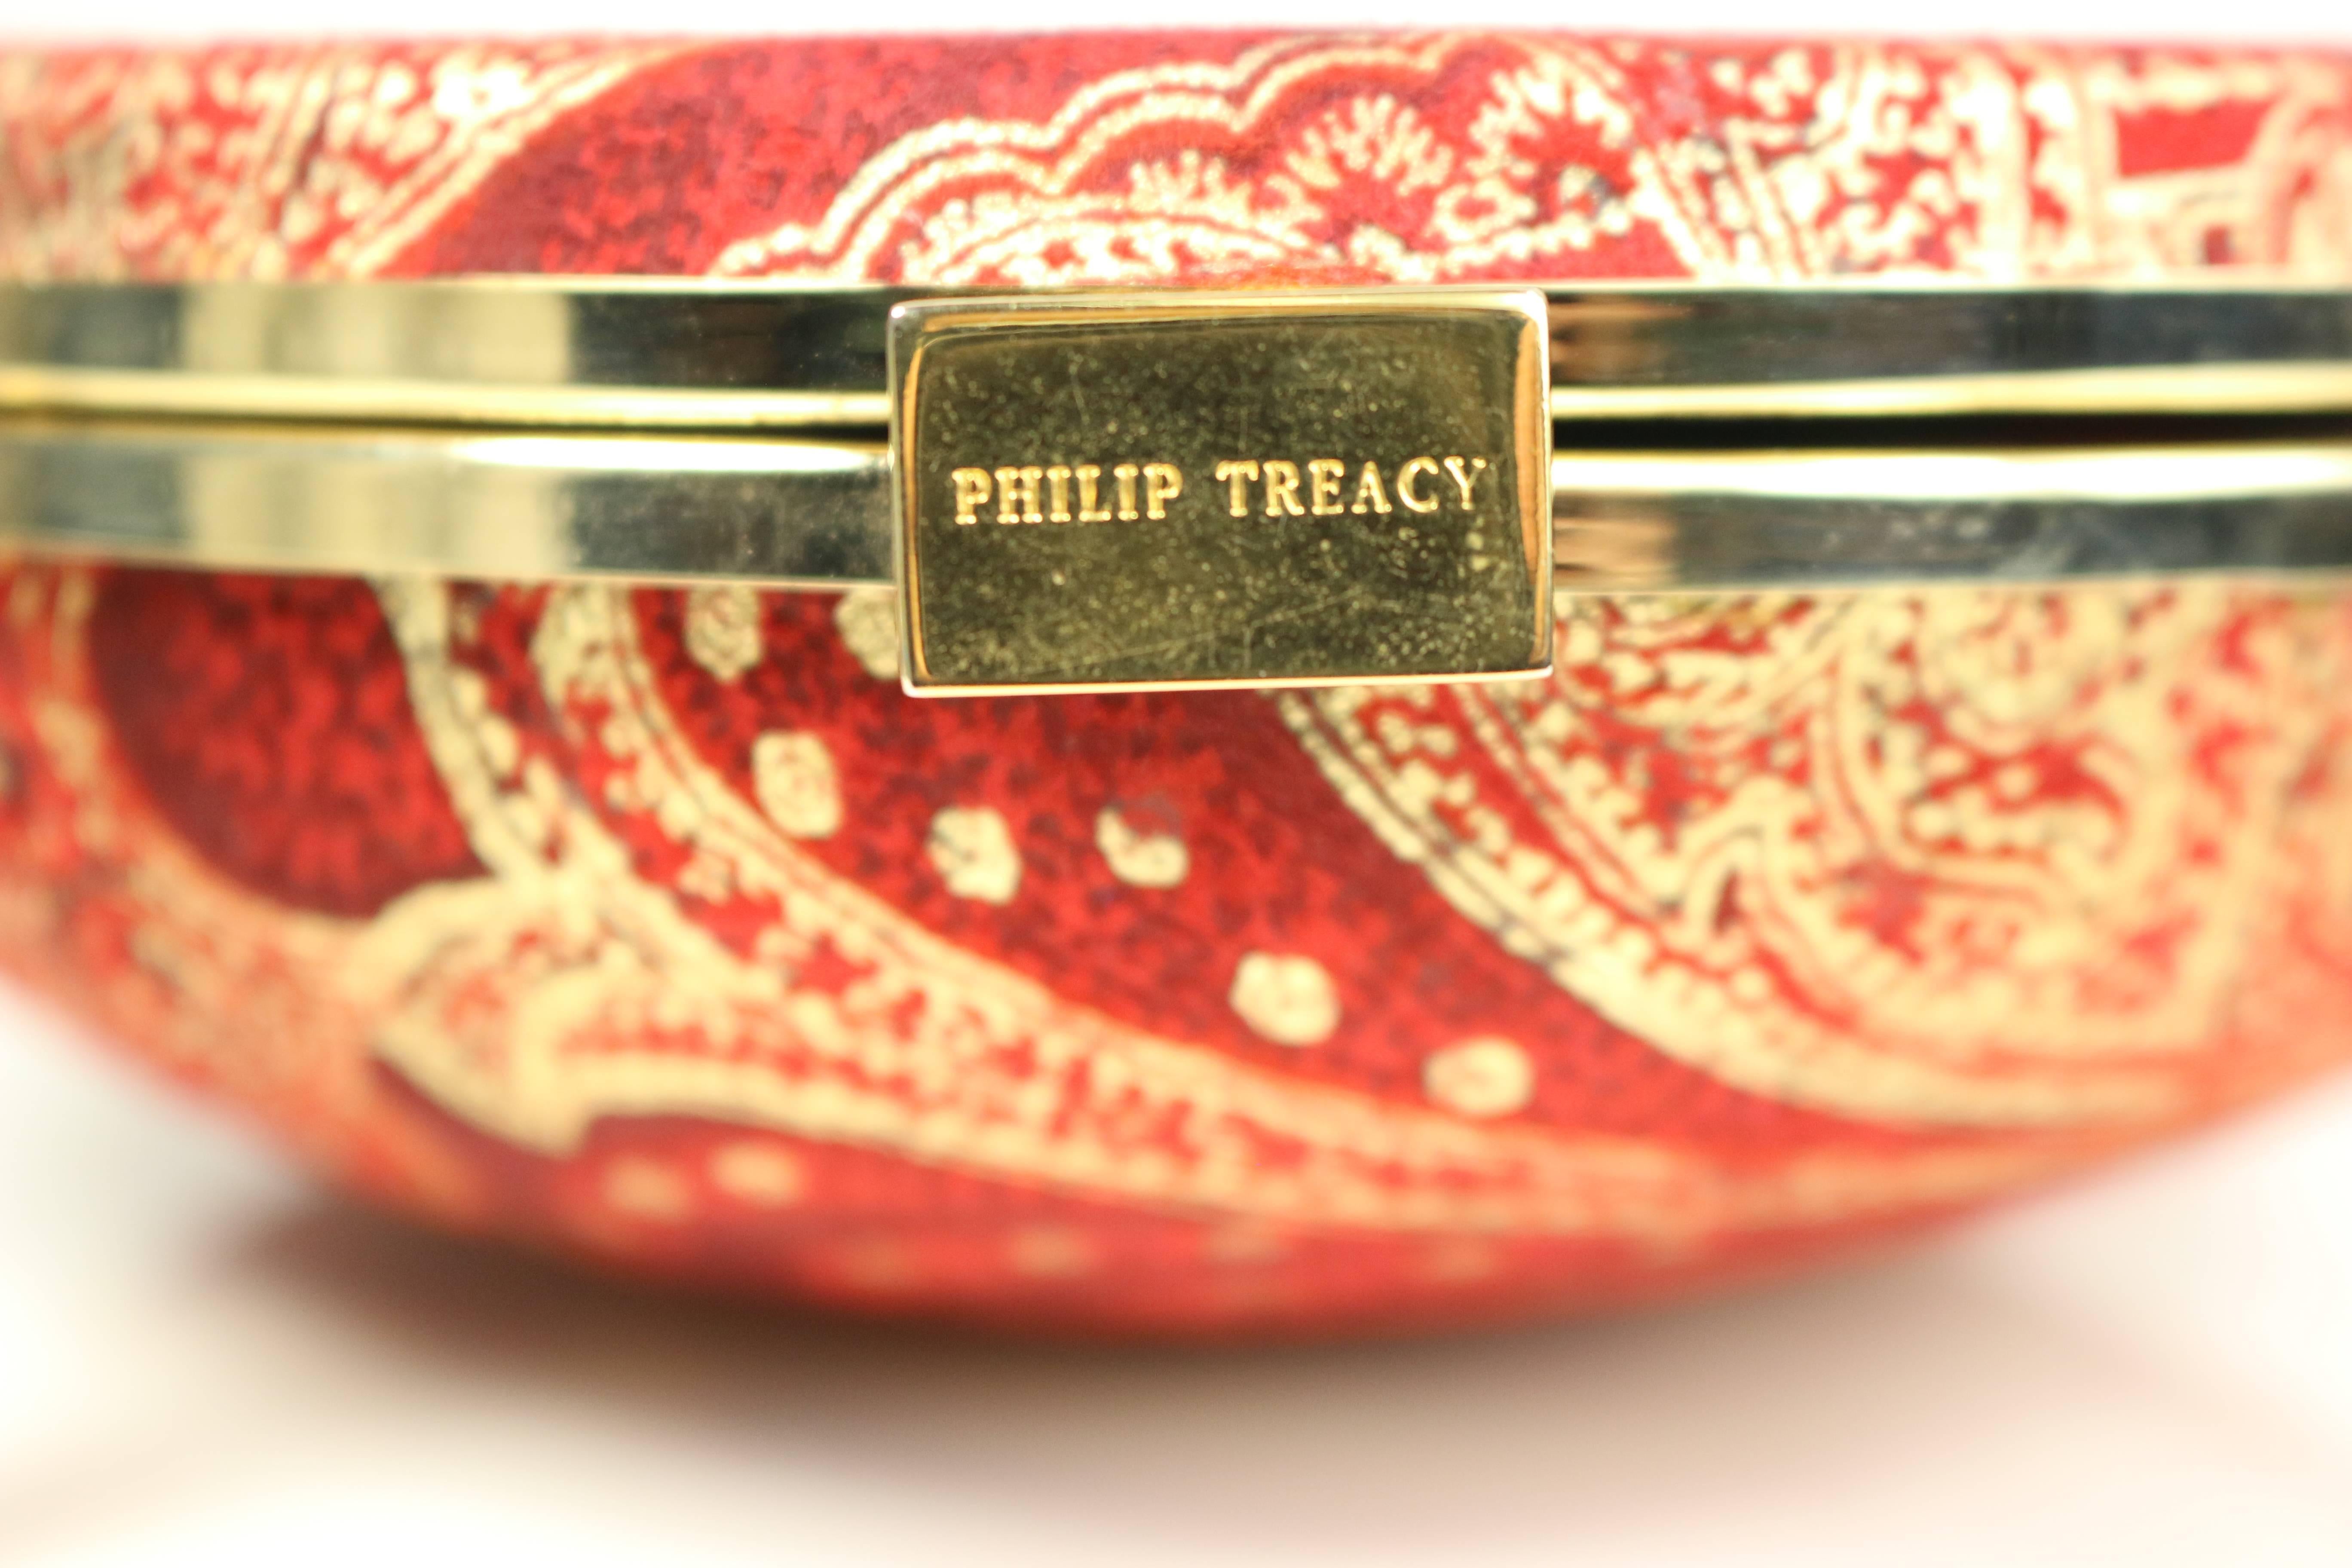 - Vintage 90s Philip Treacy red and gold pattern print clutches handbag. Rare and one of a kind!

- Attached with a red tassel. 

- Gold toned hardware 